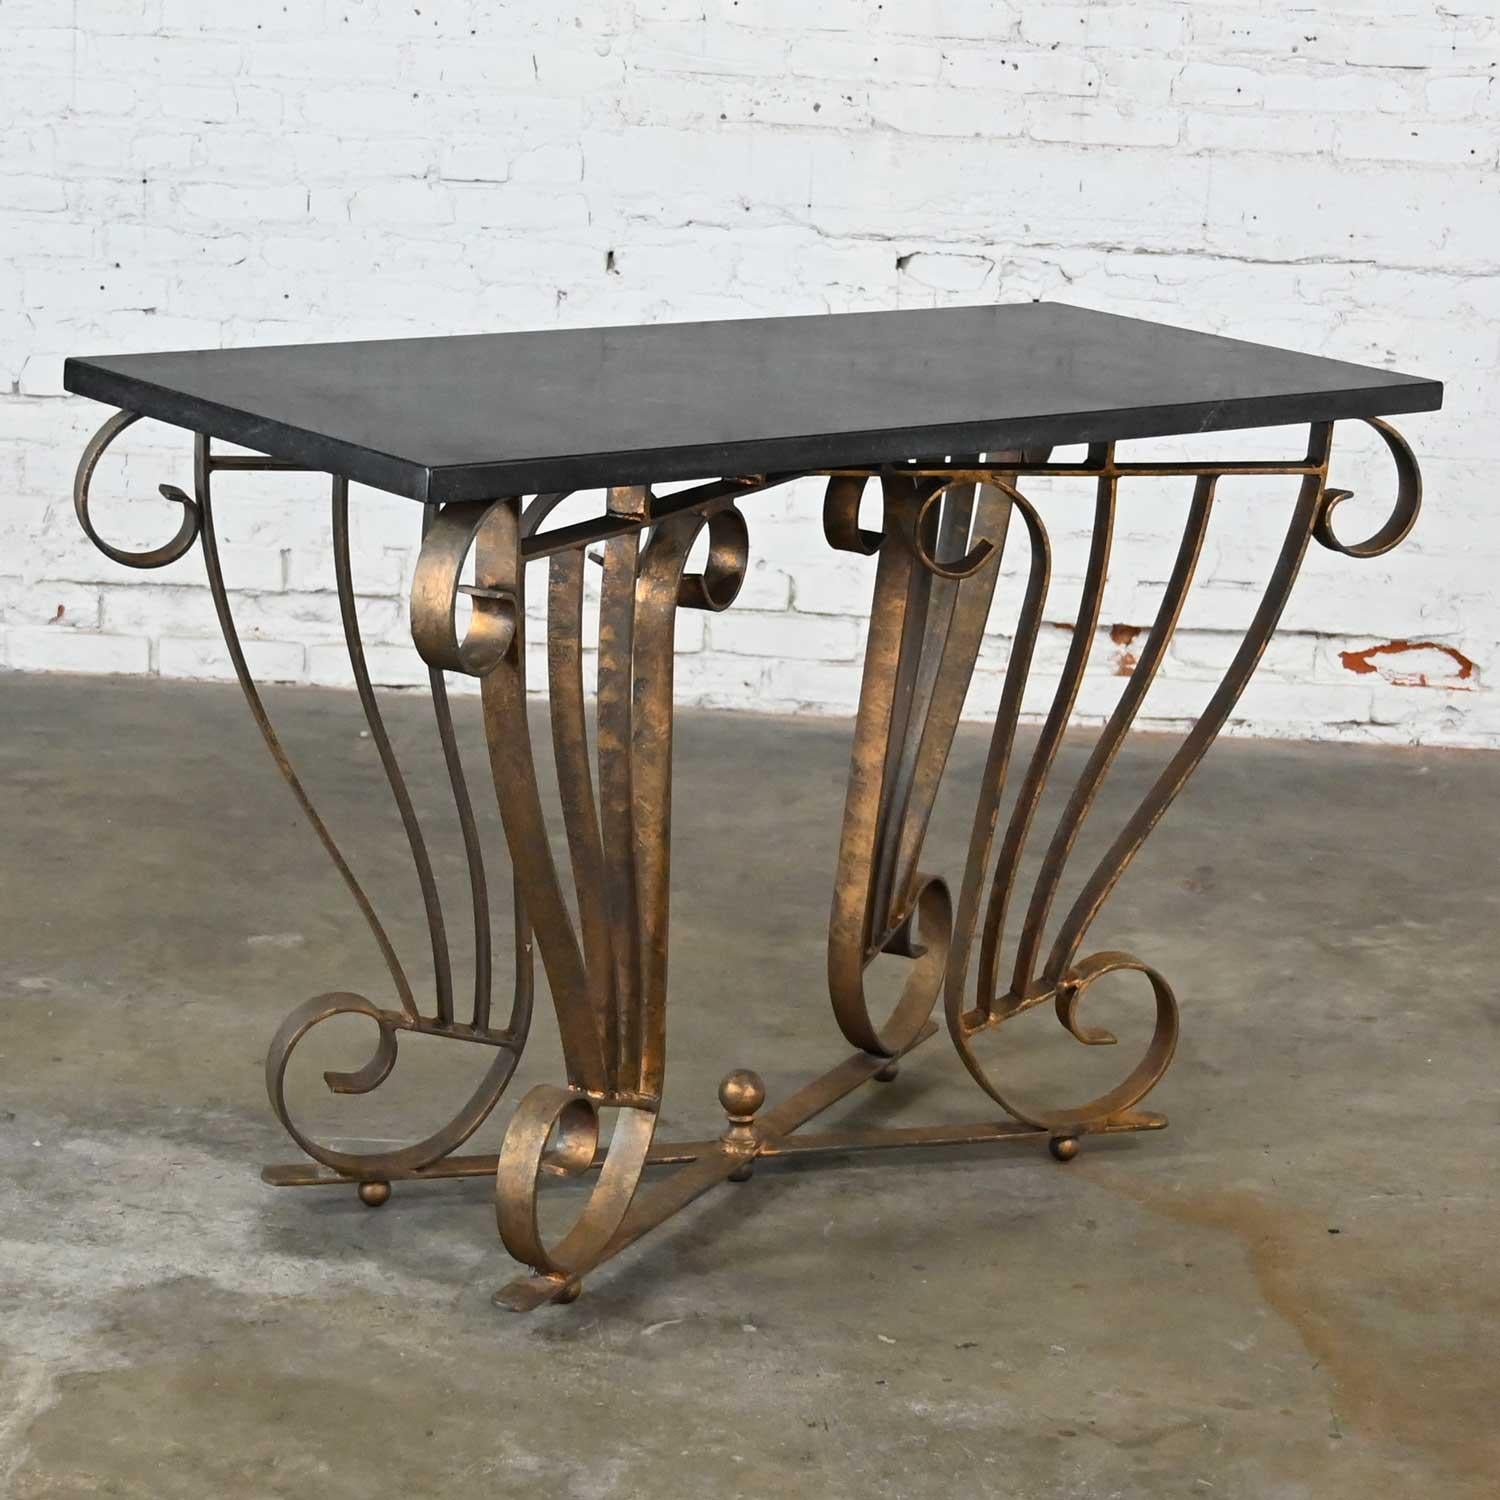 American Vintage Art Deco Style Wrought Iron Granite Top Sofa Console Table